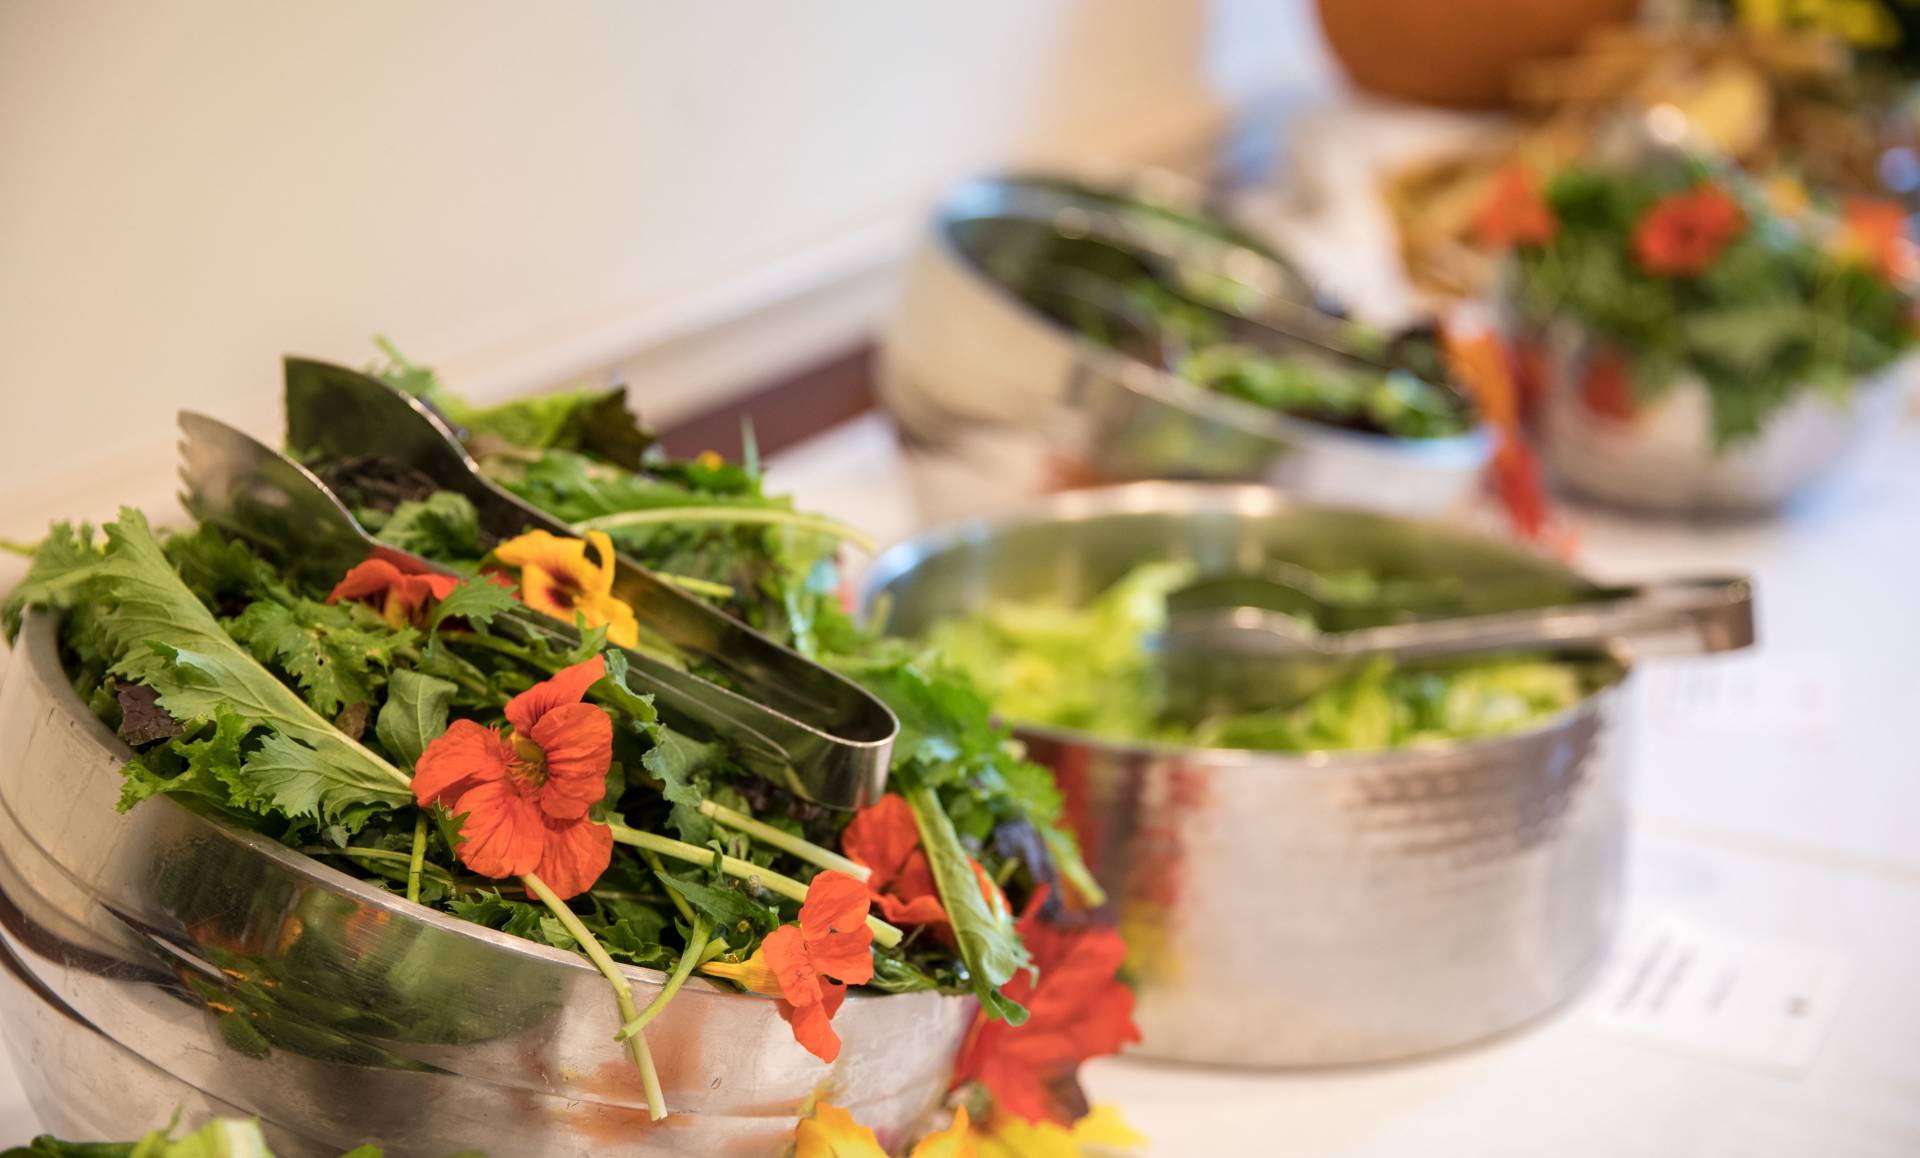 Edible flowers and greens from Vertical Farming and Forbes Garden